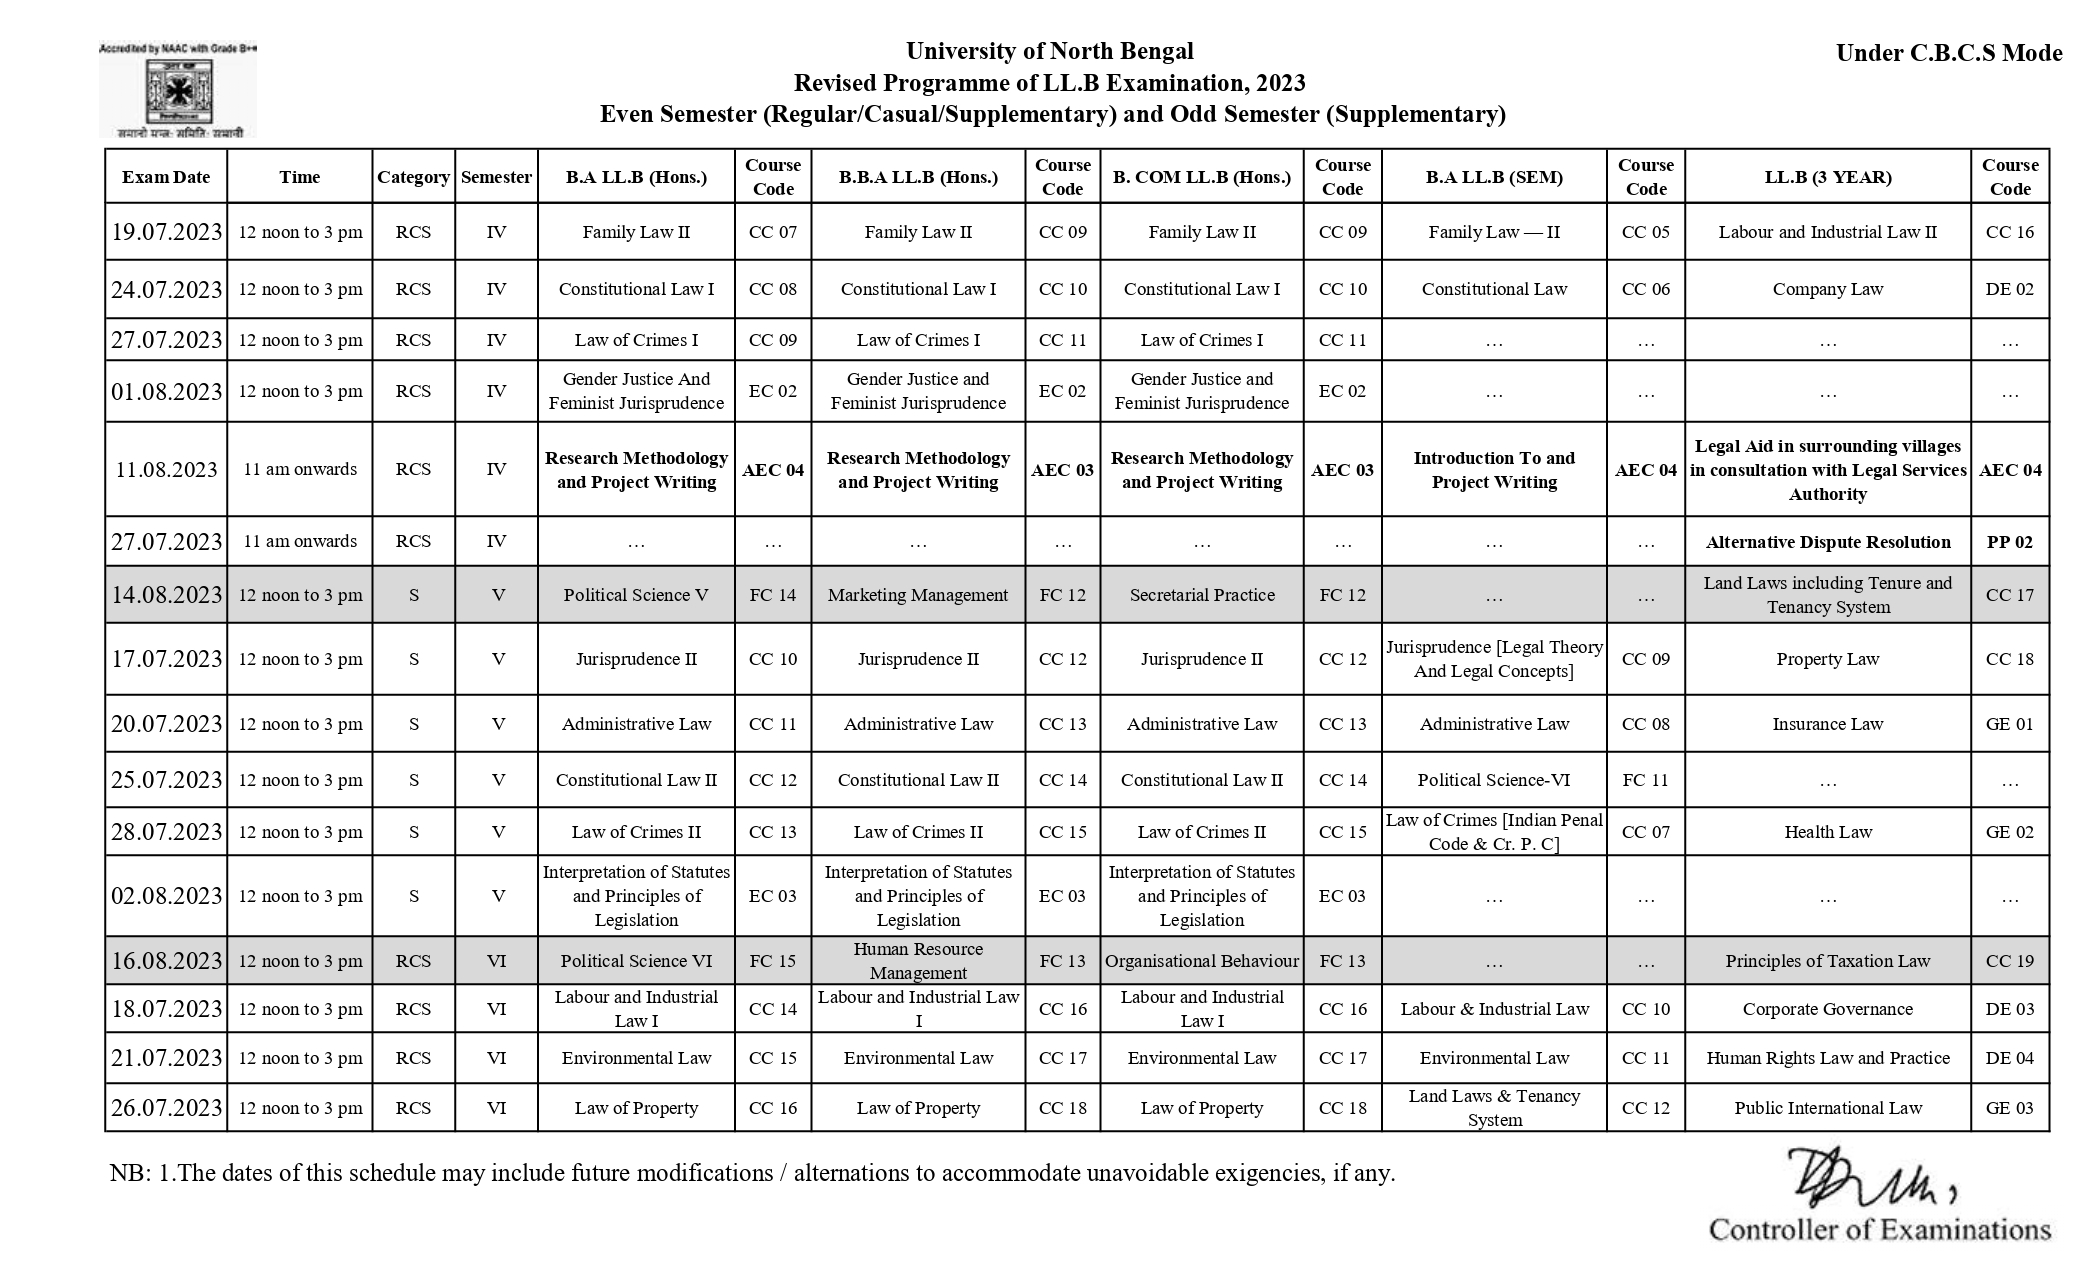 Revised Examination Schedule July 2023 (CBCS) Page 2